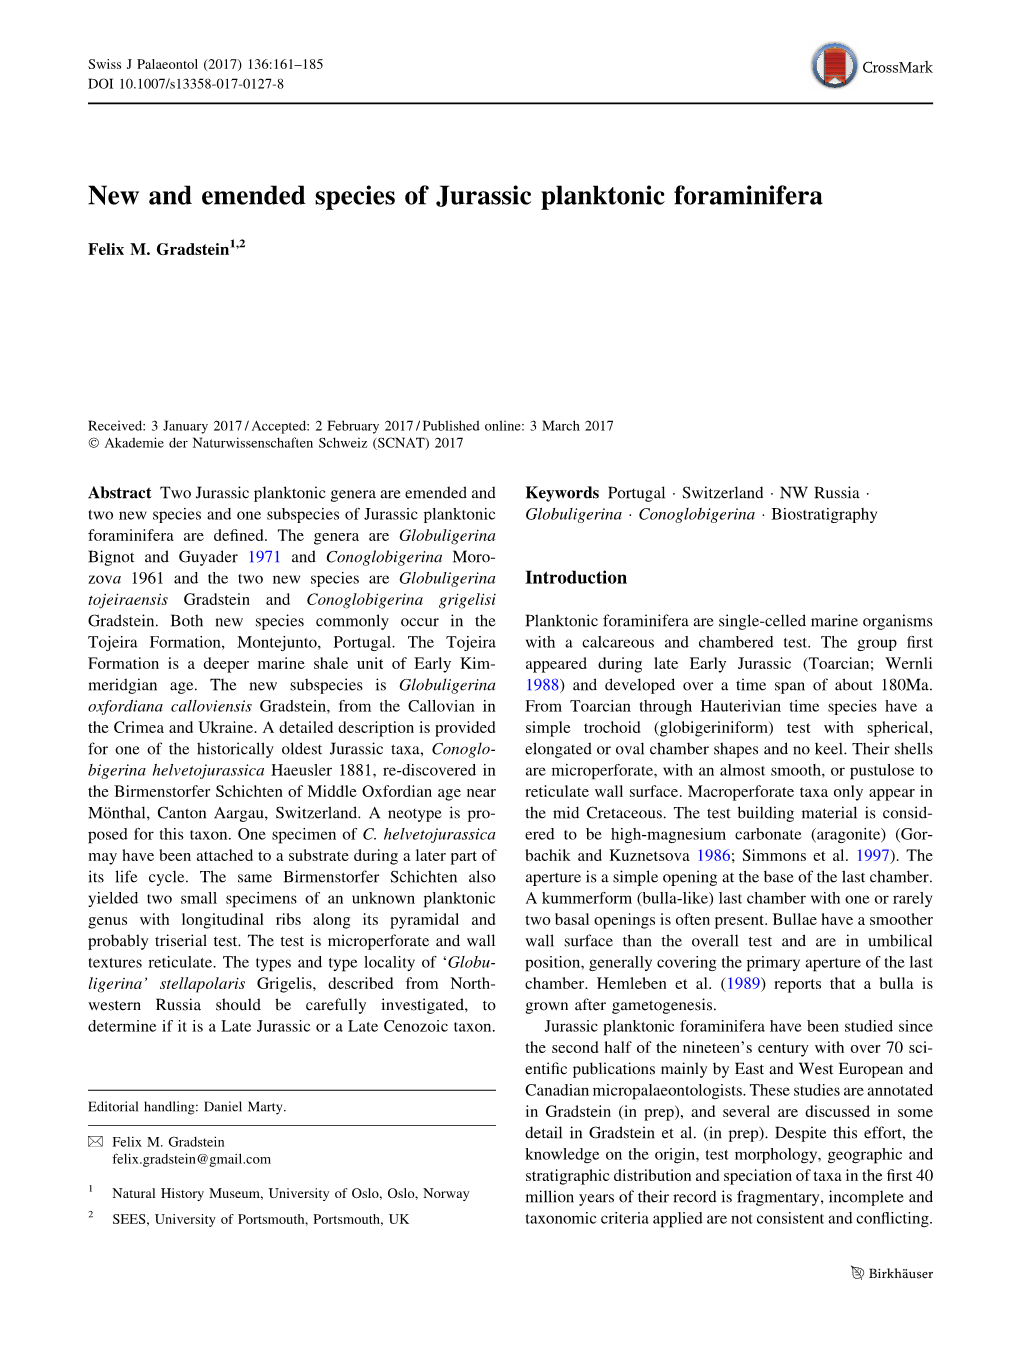 New and Emended Species of Jurassic Planktonic Foraminifera